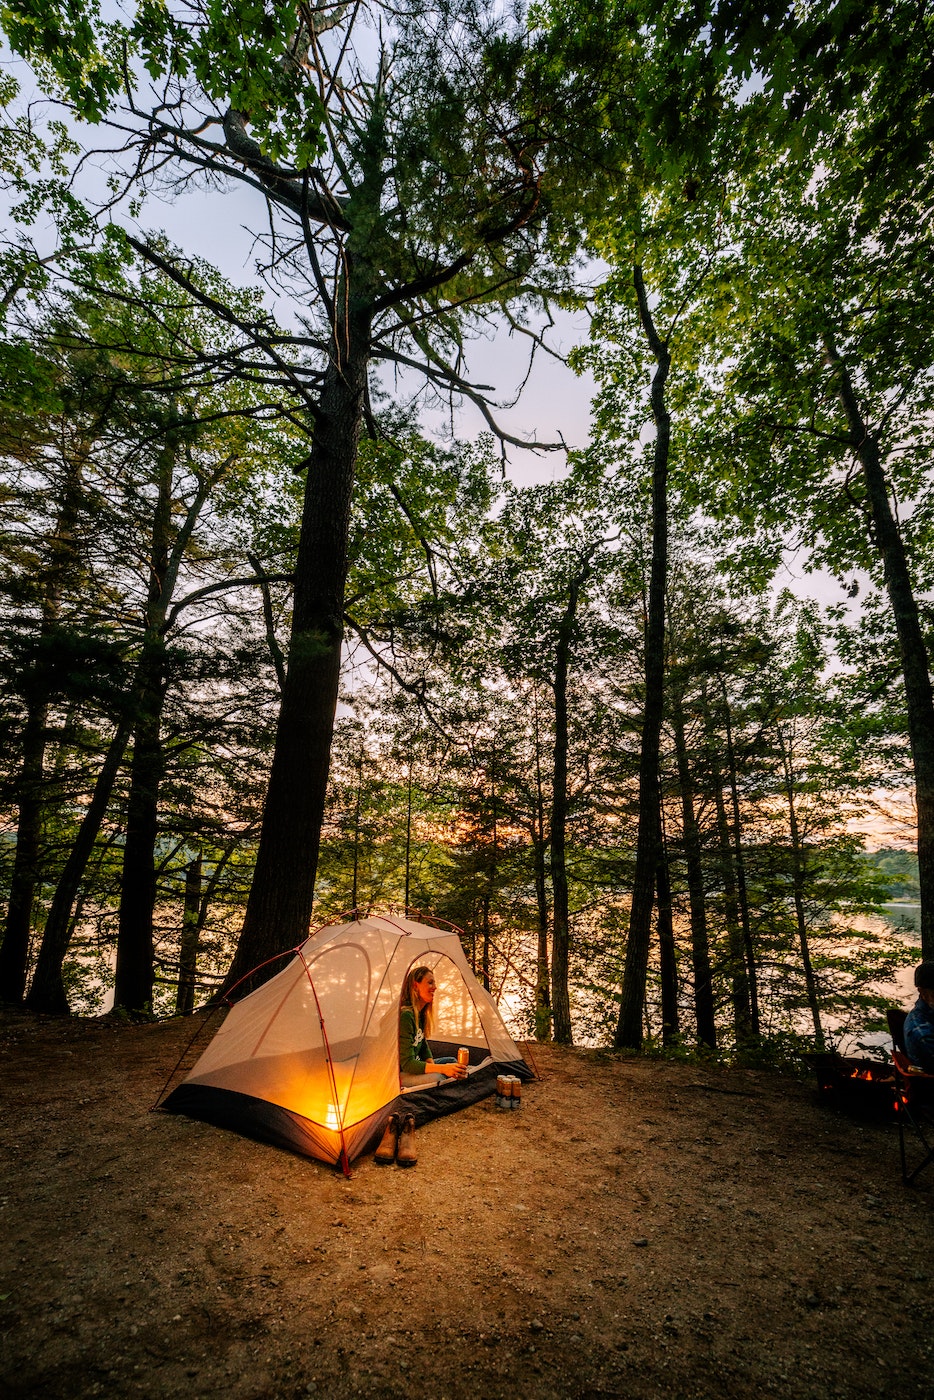 A tent at Wolfe's Neck campground in Maine